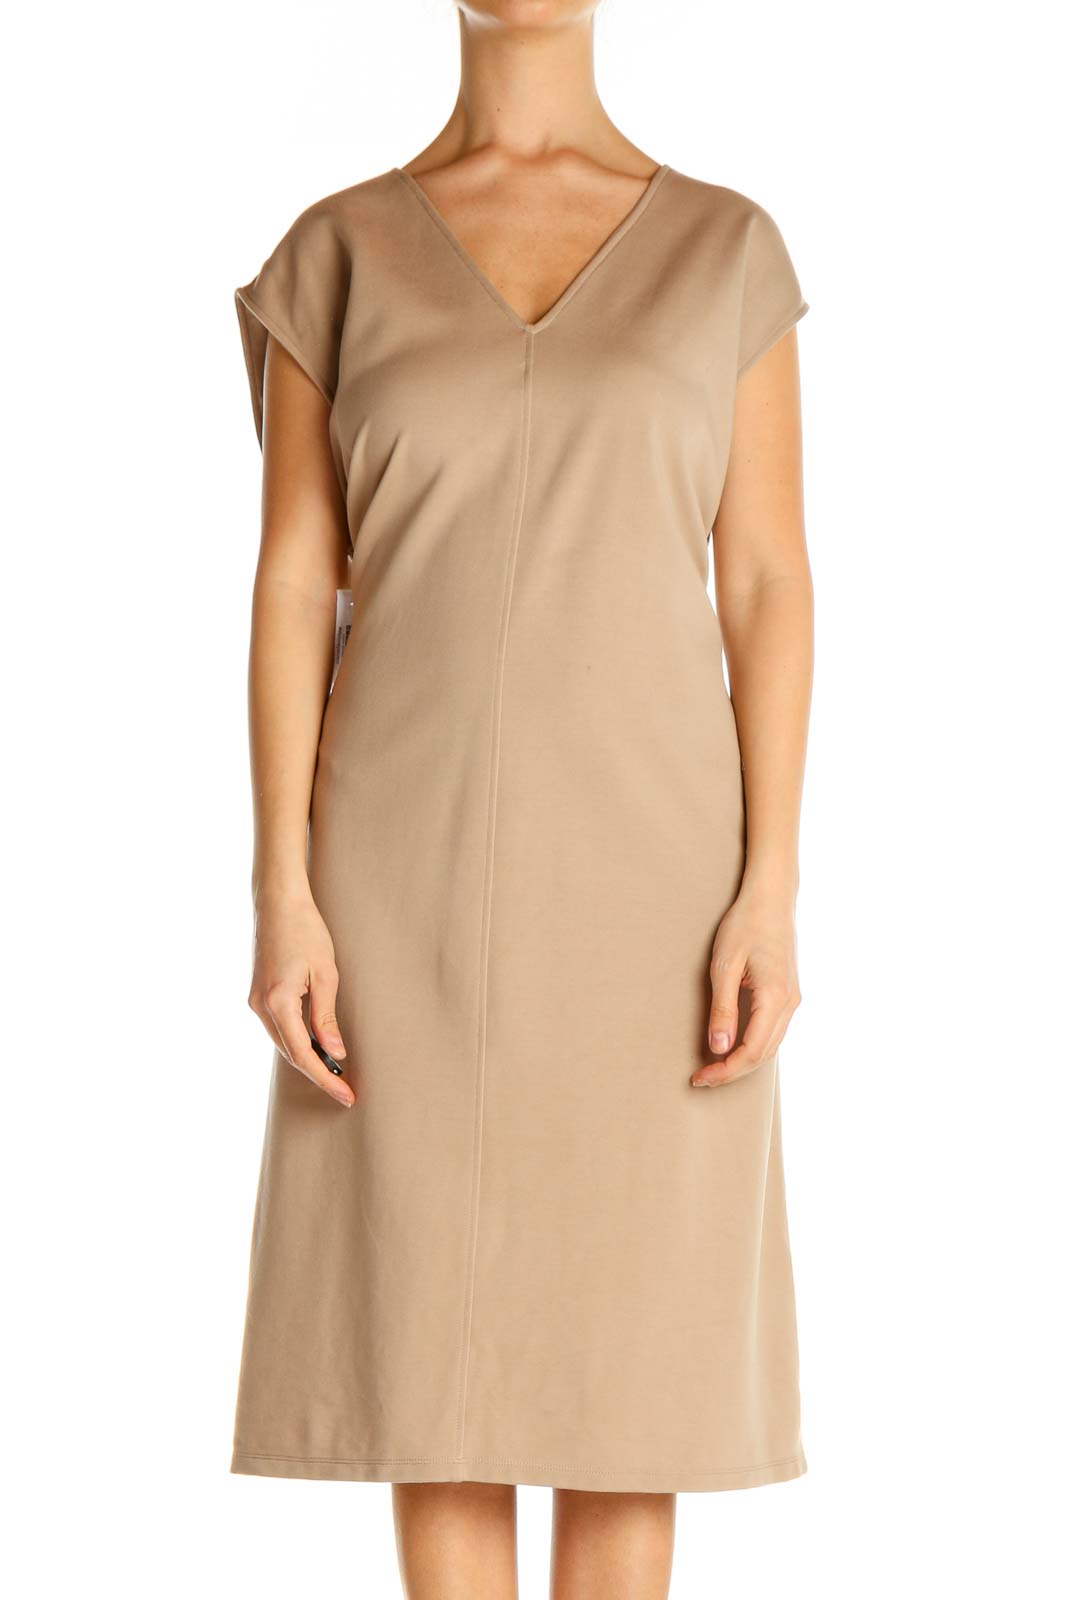 Beige Solid Day Shift Dress Front